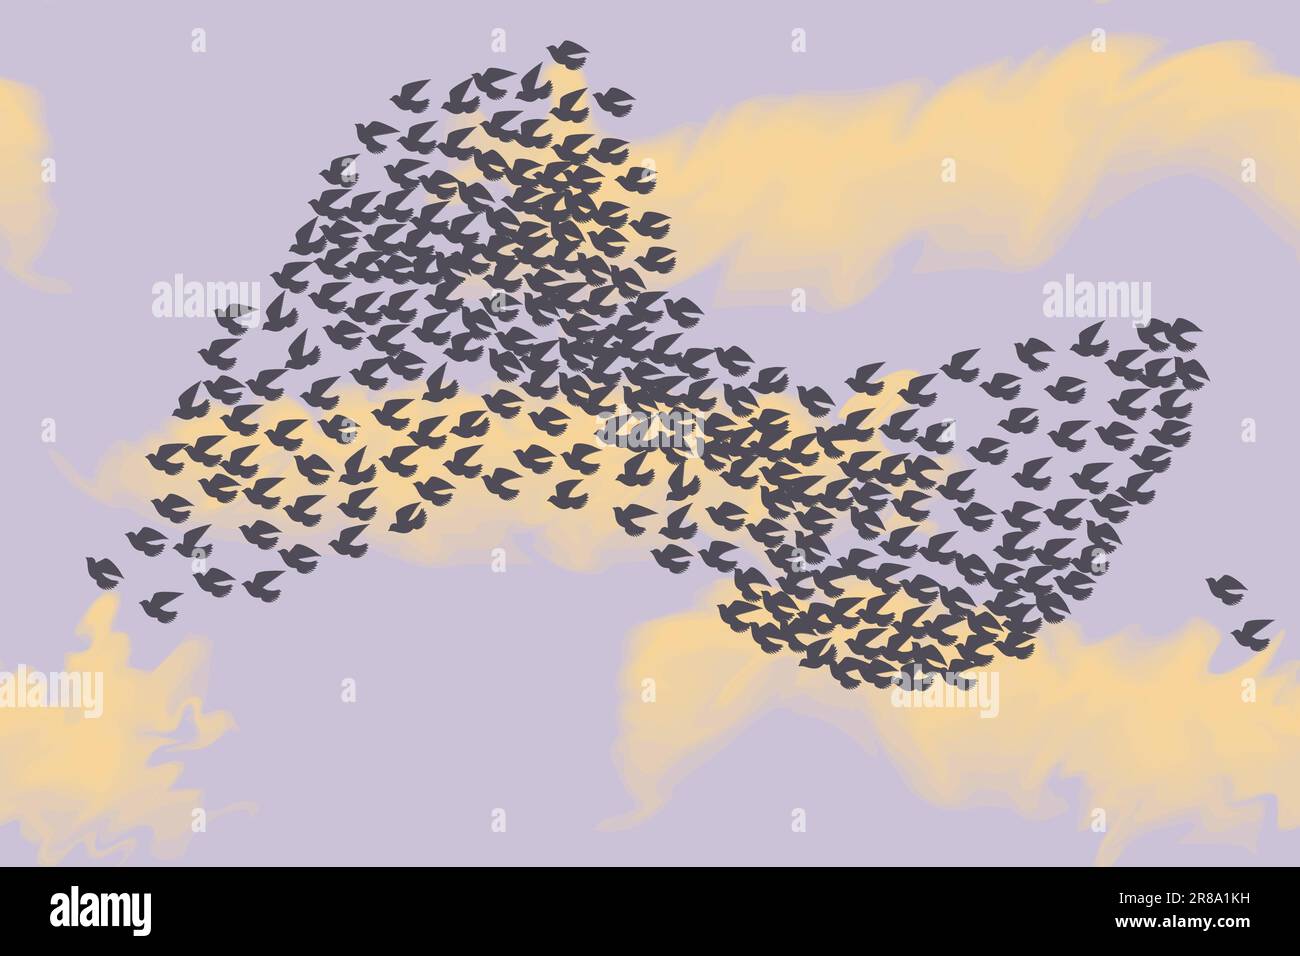 Big flock of black birds and cloudy sky, seamless vector pattern Stock Vector